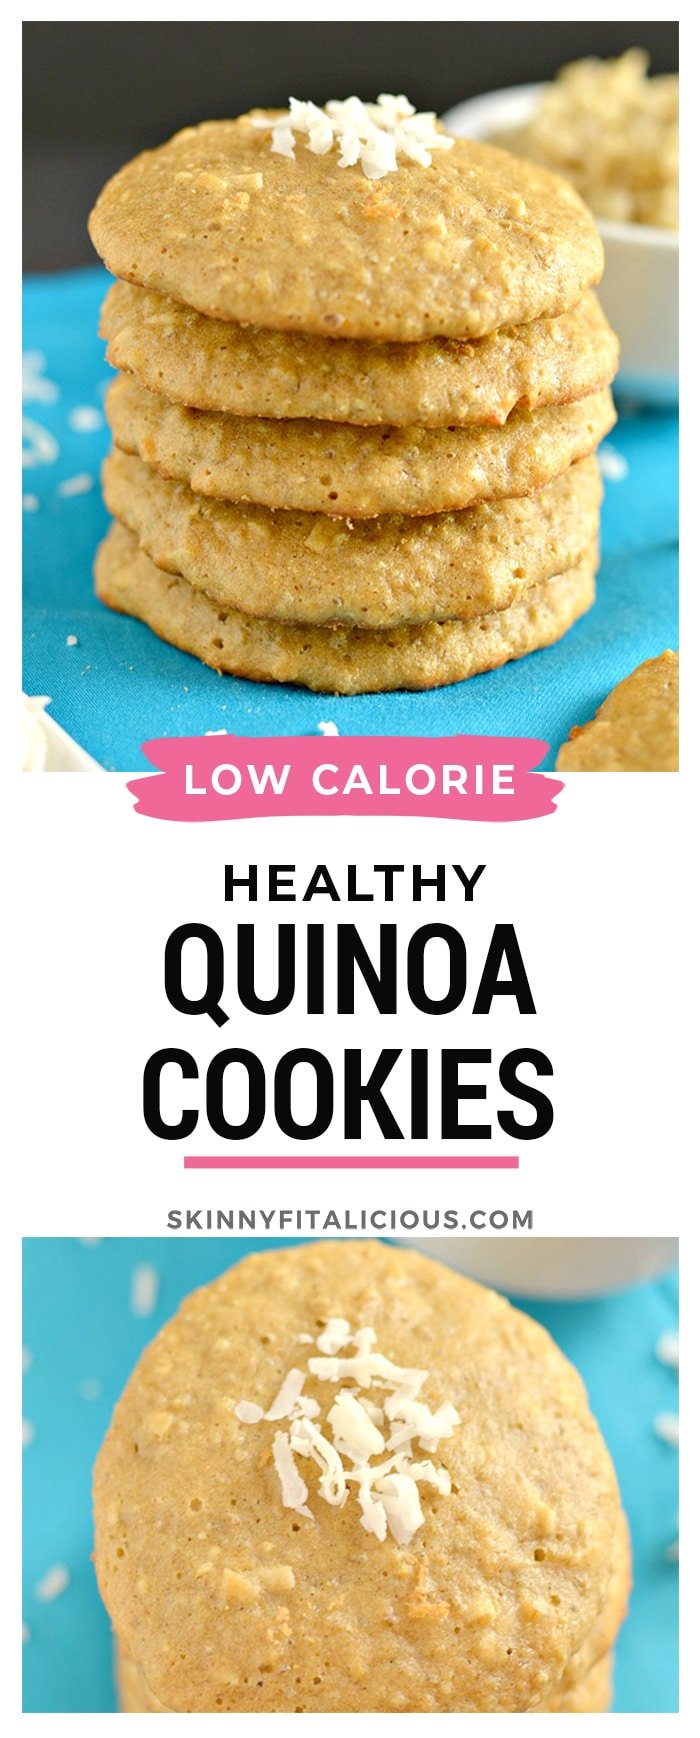 These Quinoa Cookies laced with coconut and cinnamon are soft, chewy and melt-in-your-mouth. Made with a handful of healthy ingredients and packed with protein and whole grains, you couldn't ask for a better cookie!